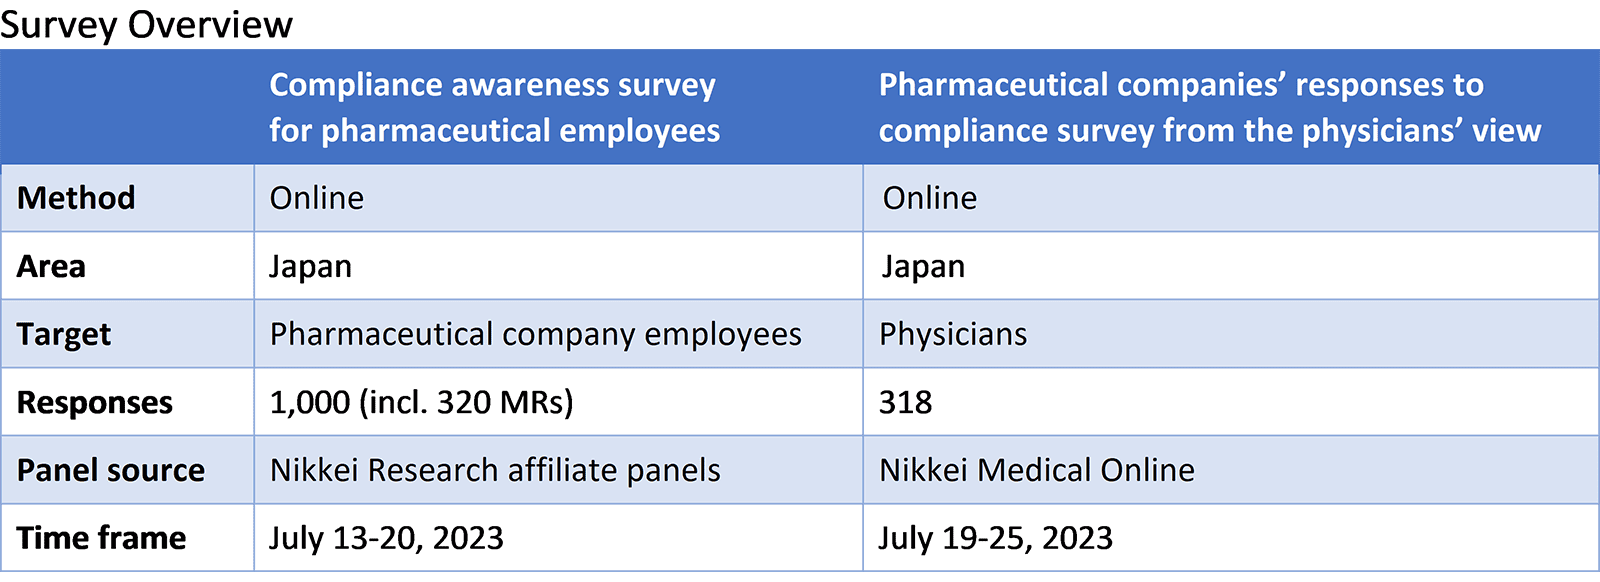 Nikkei Research conducted a compliance awareness survey targeting pharmaceutical employees and a survey on pharmaceutical companies' compliance responses from the perspective of doctors.